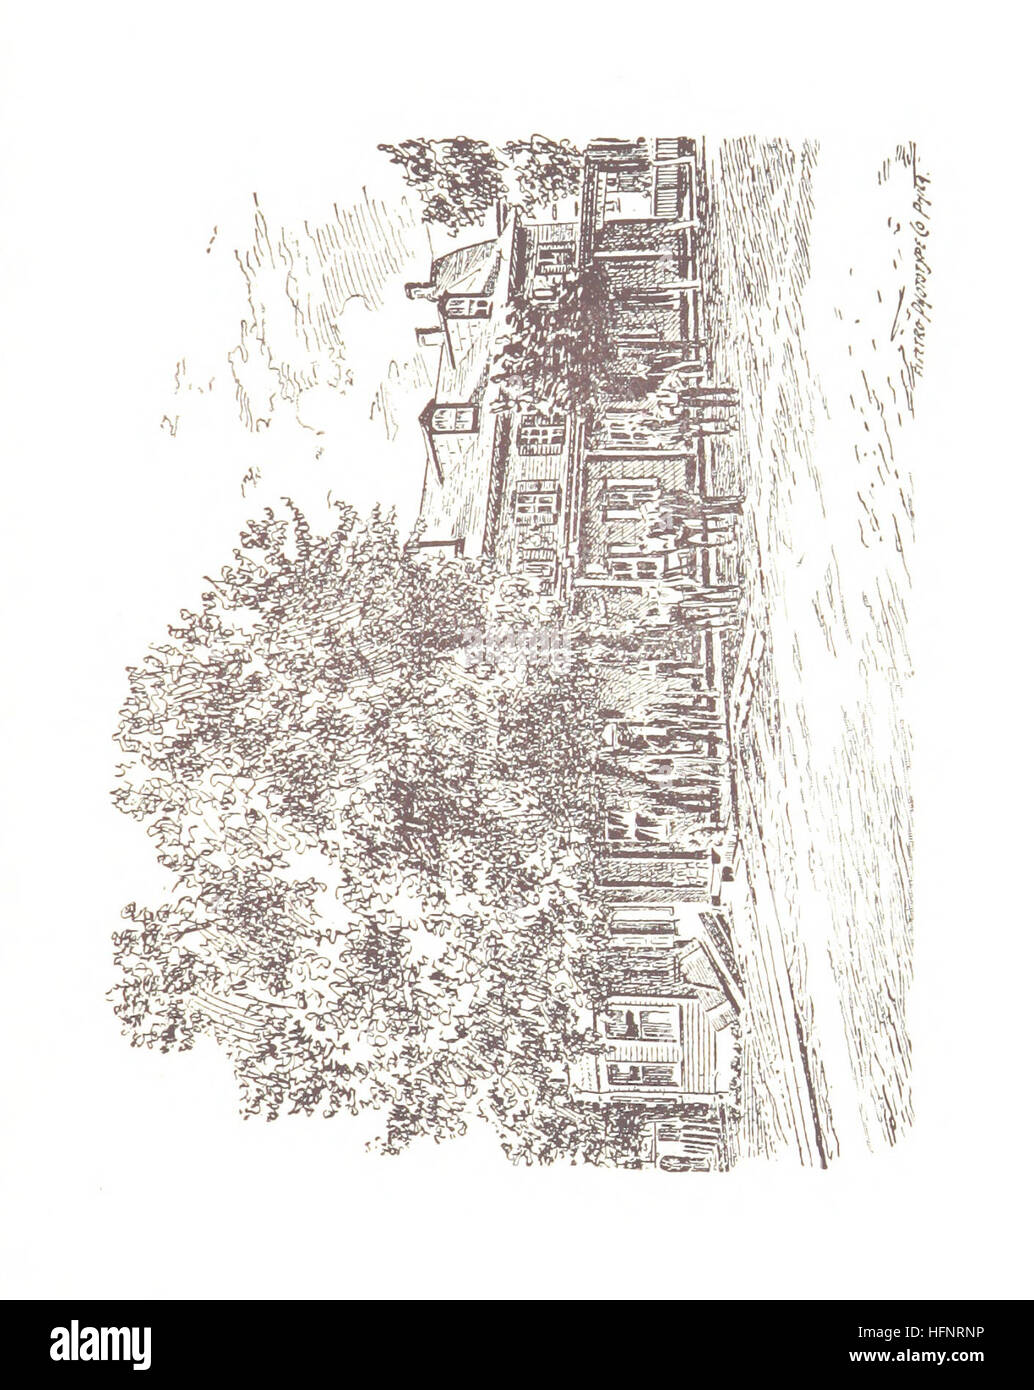 Image taken from page 59 of 'The Fries Rebellion, 1789-99. An armed resistance to the House Tax Law, passed by Congress, July 9, 1789, in Bucks and Northampton Counties, Pennsylvania. [With plates, including a portrait of the author.]' Image taken from page 59 of 'The Fries Rebellion, 1789-99 Stock Photo